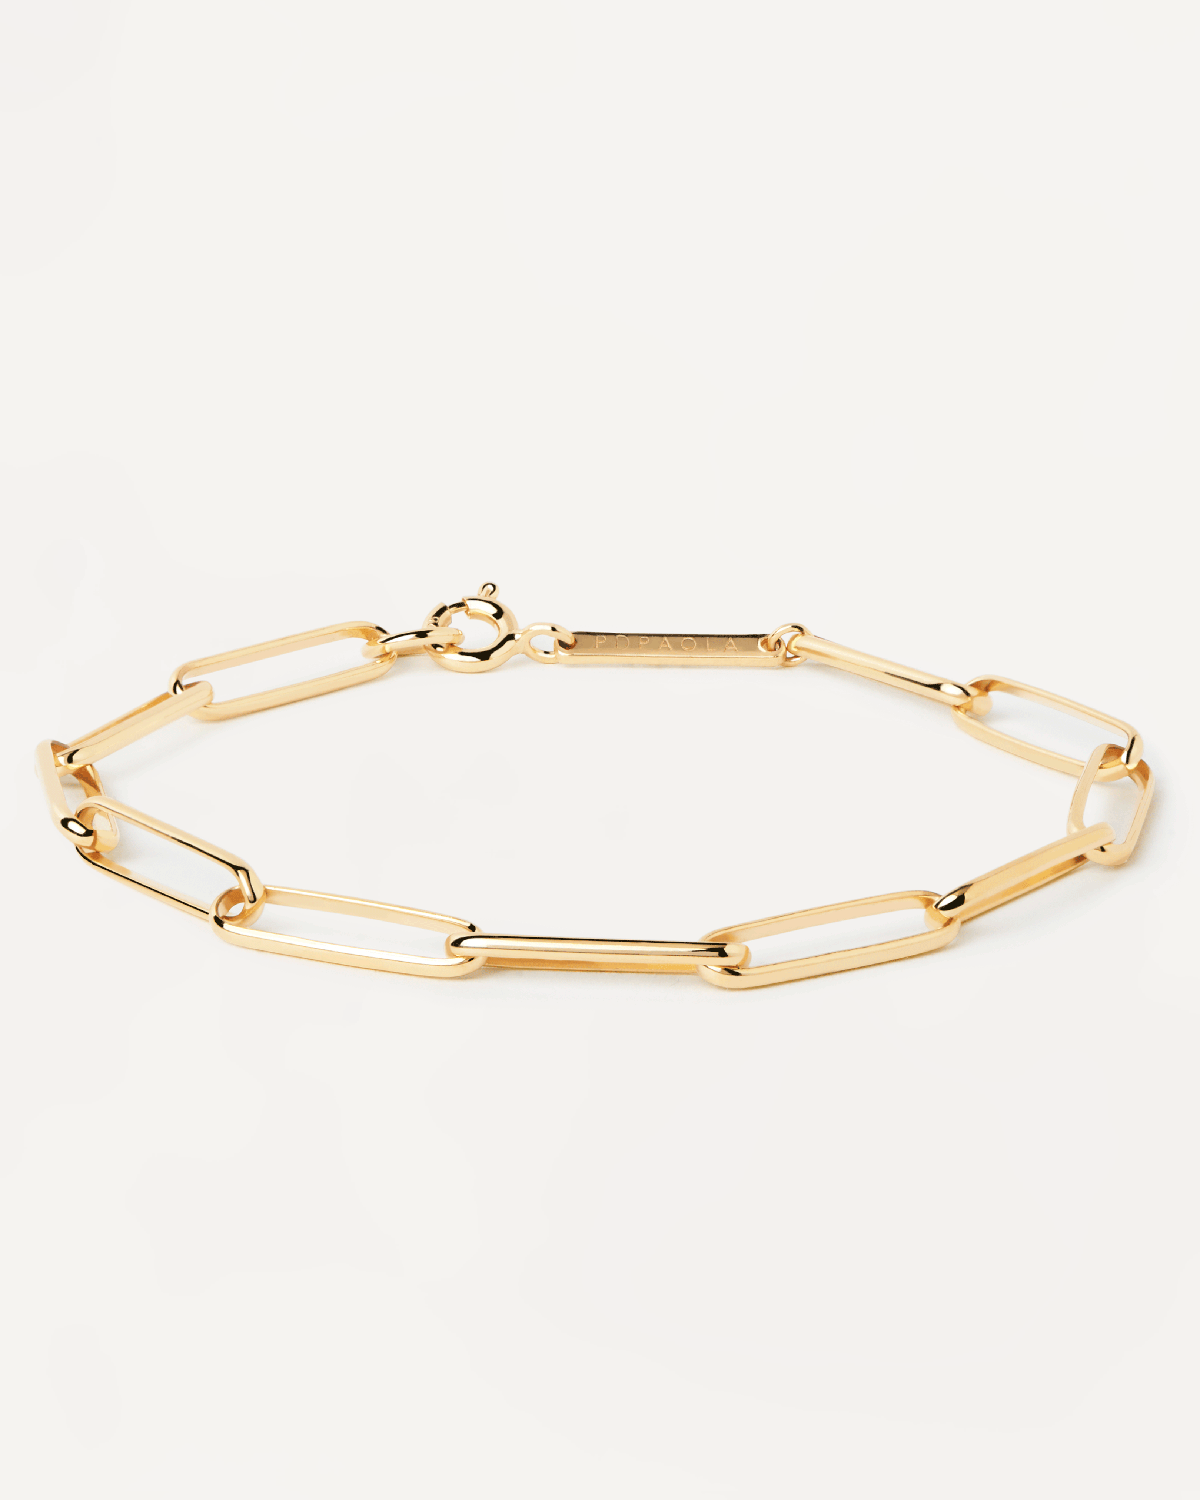 2023 Selection | Big Statement Chain Bracelet. Statement chain bracelet in gold-plated silver with large links. Get the latest arrival from PDPAOLA. Place your order safely and get this Best Seller. Free Shipping.